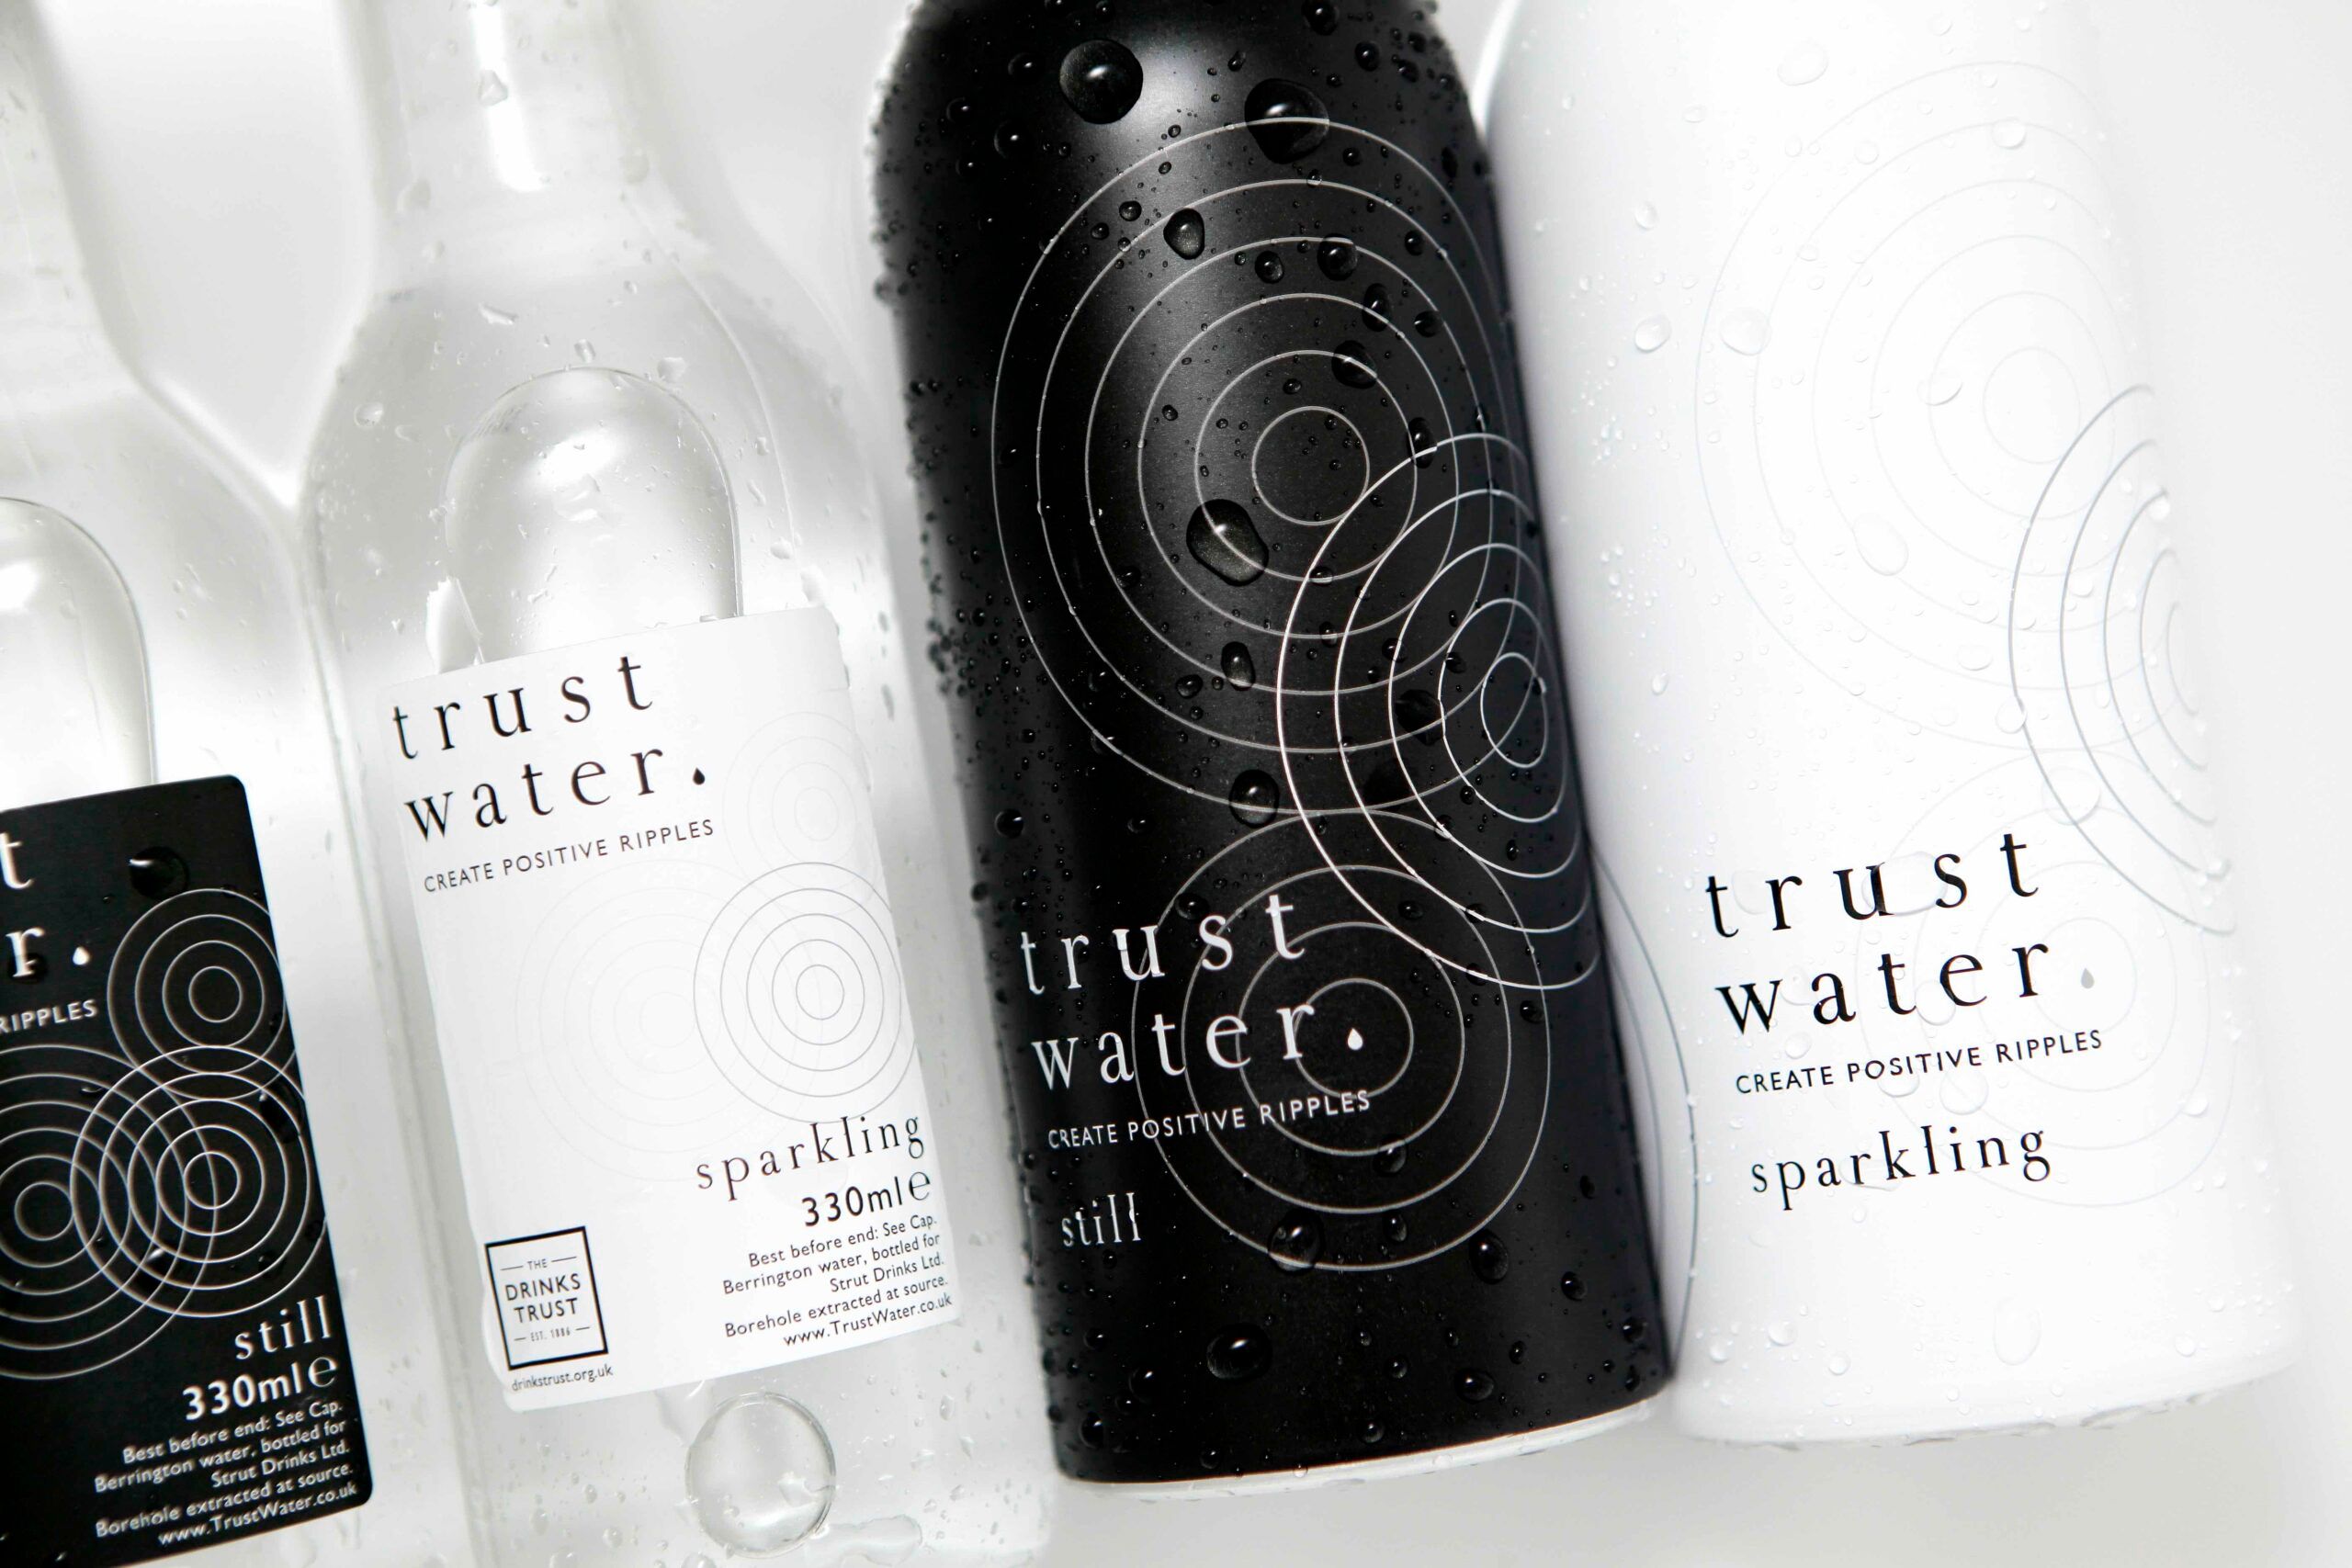 How Trust Water hopes to raise £500k for The Drinks Trust